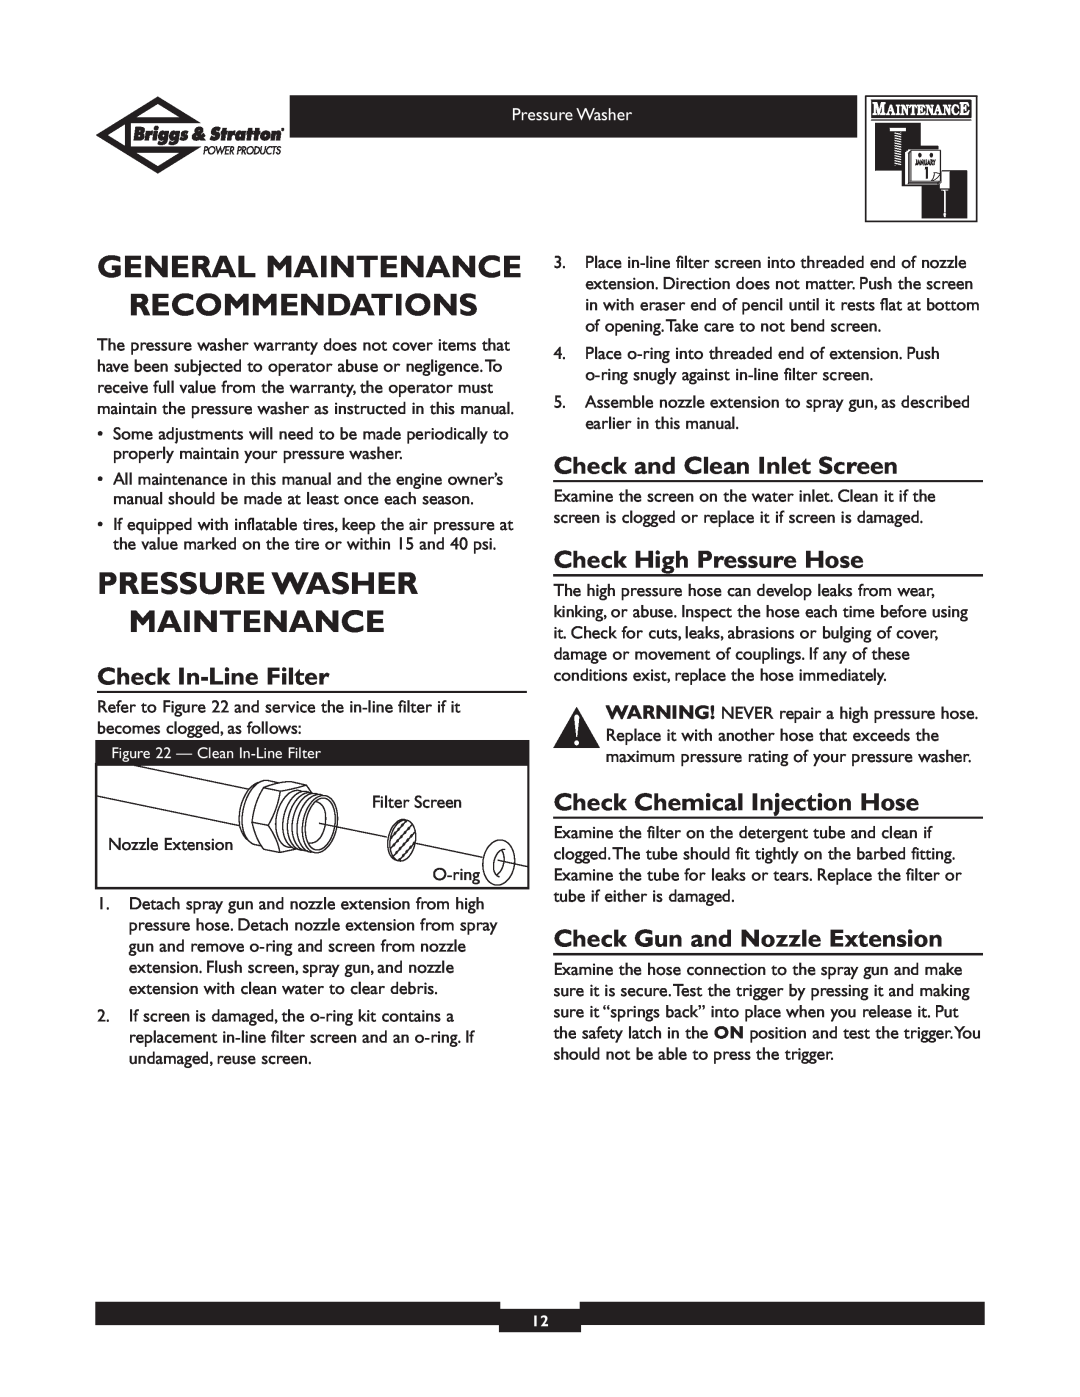 Briggs & Stratton 01936 owner manual General Maintenance Recommendations, Pressure Washer Maintenance, Check In-LineFilter 